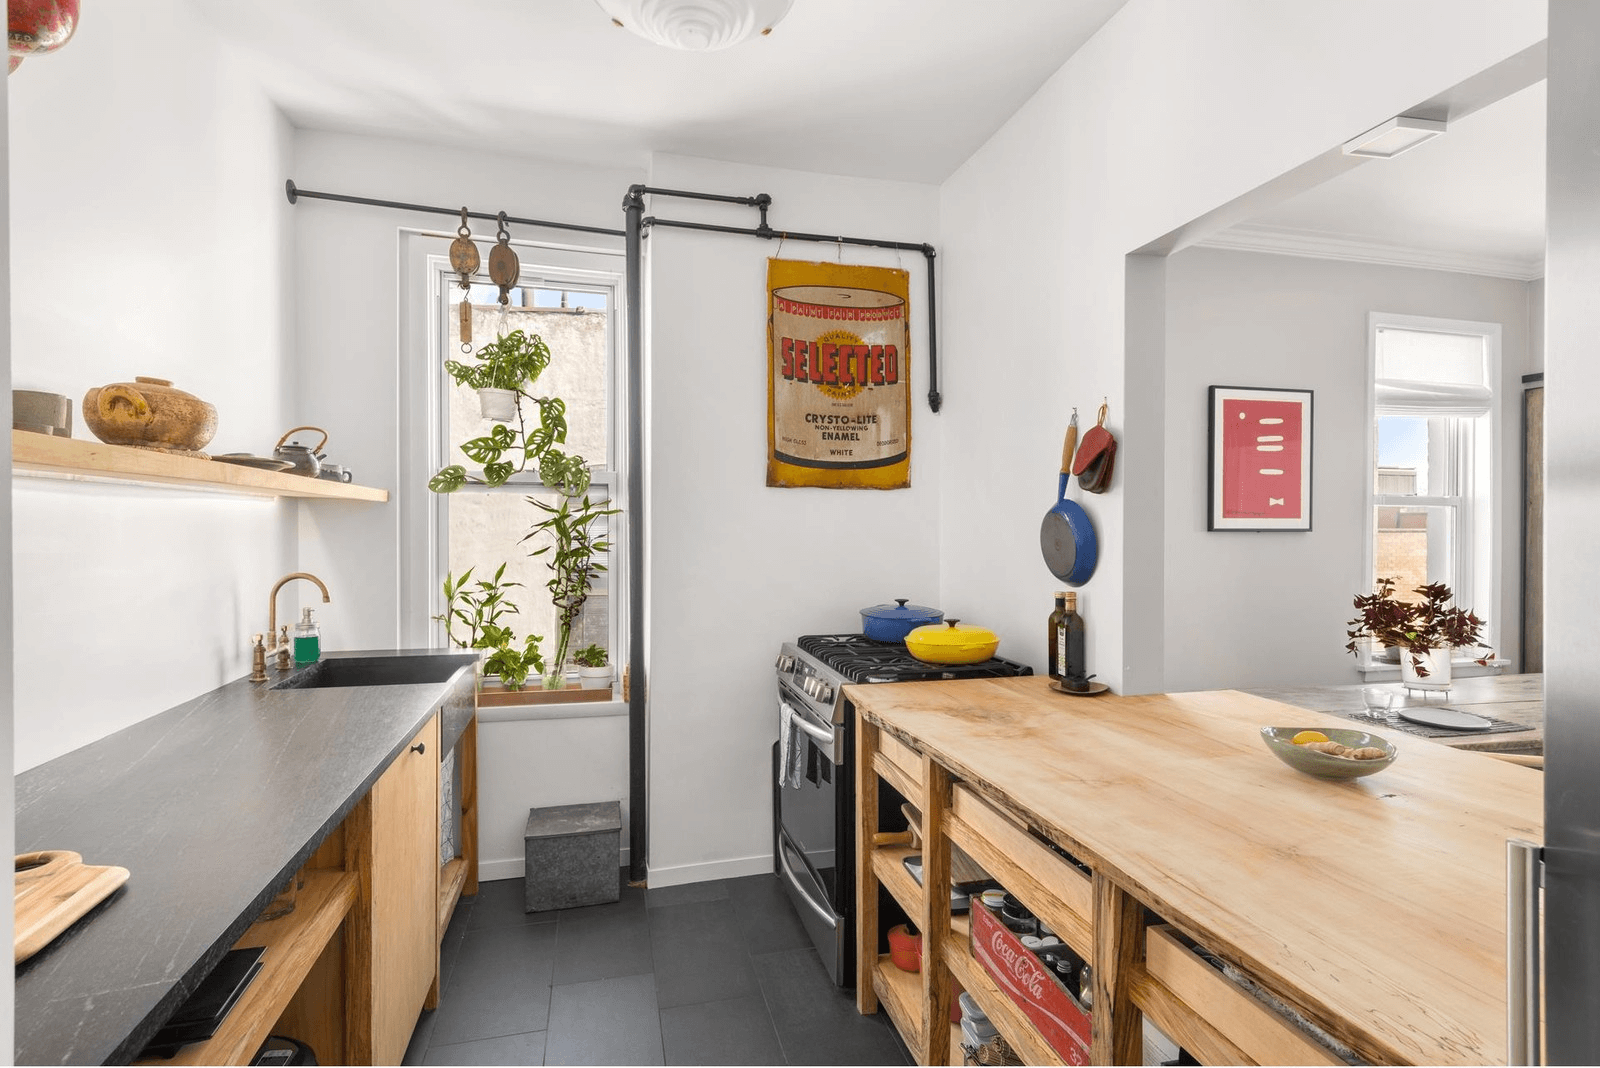 kitchen of unit 13 at 4113 7th avenue